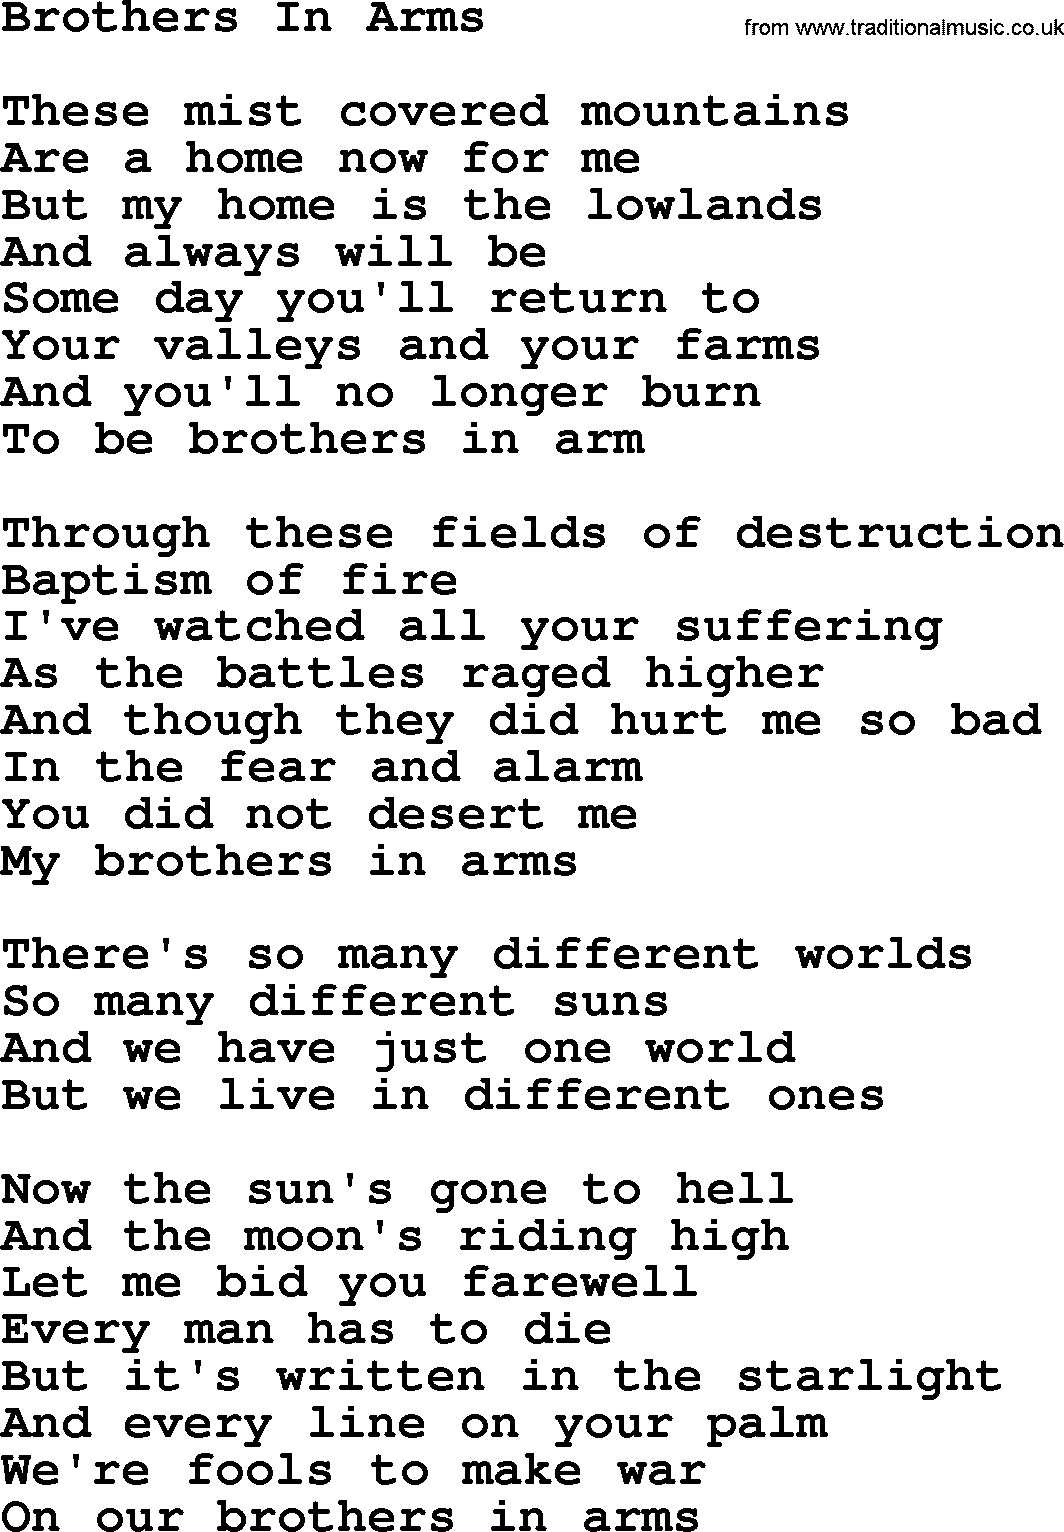 Joan Baez song Brothers In Arms, lyrics